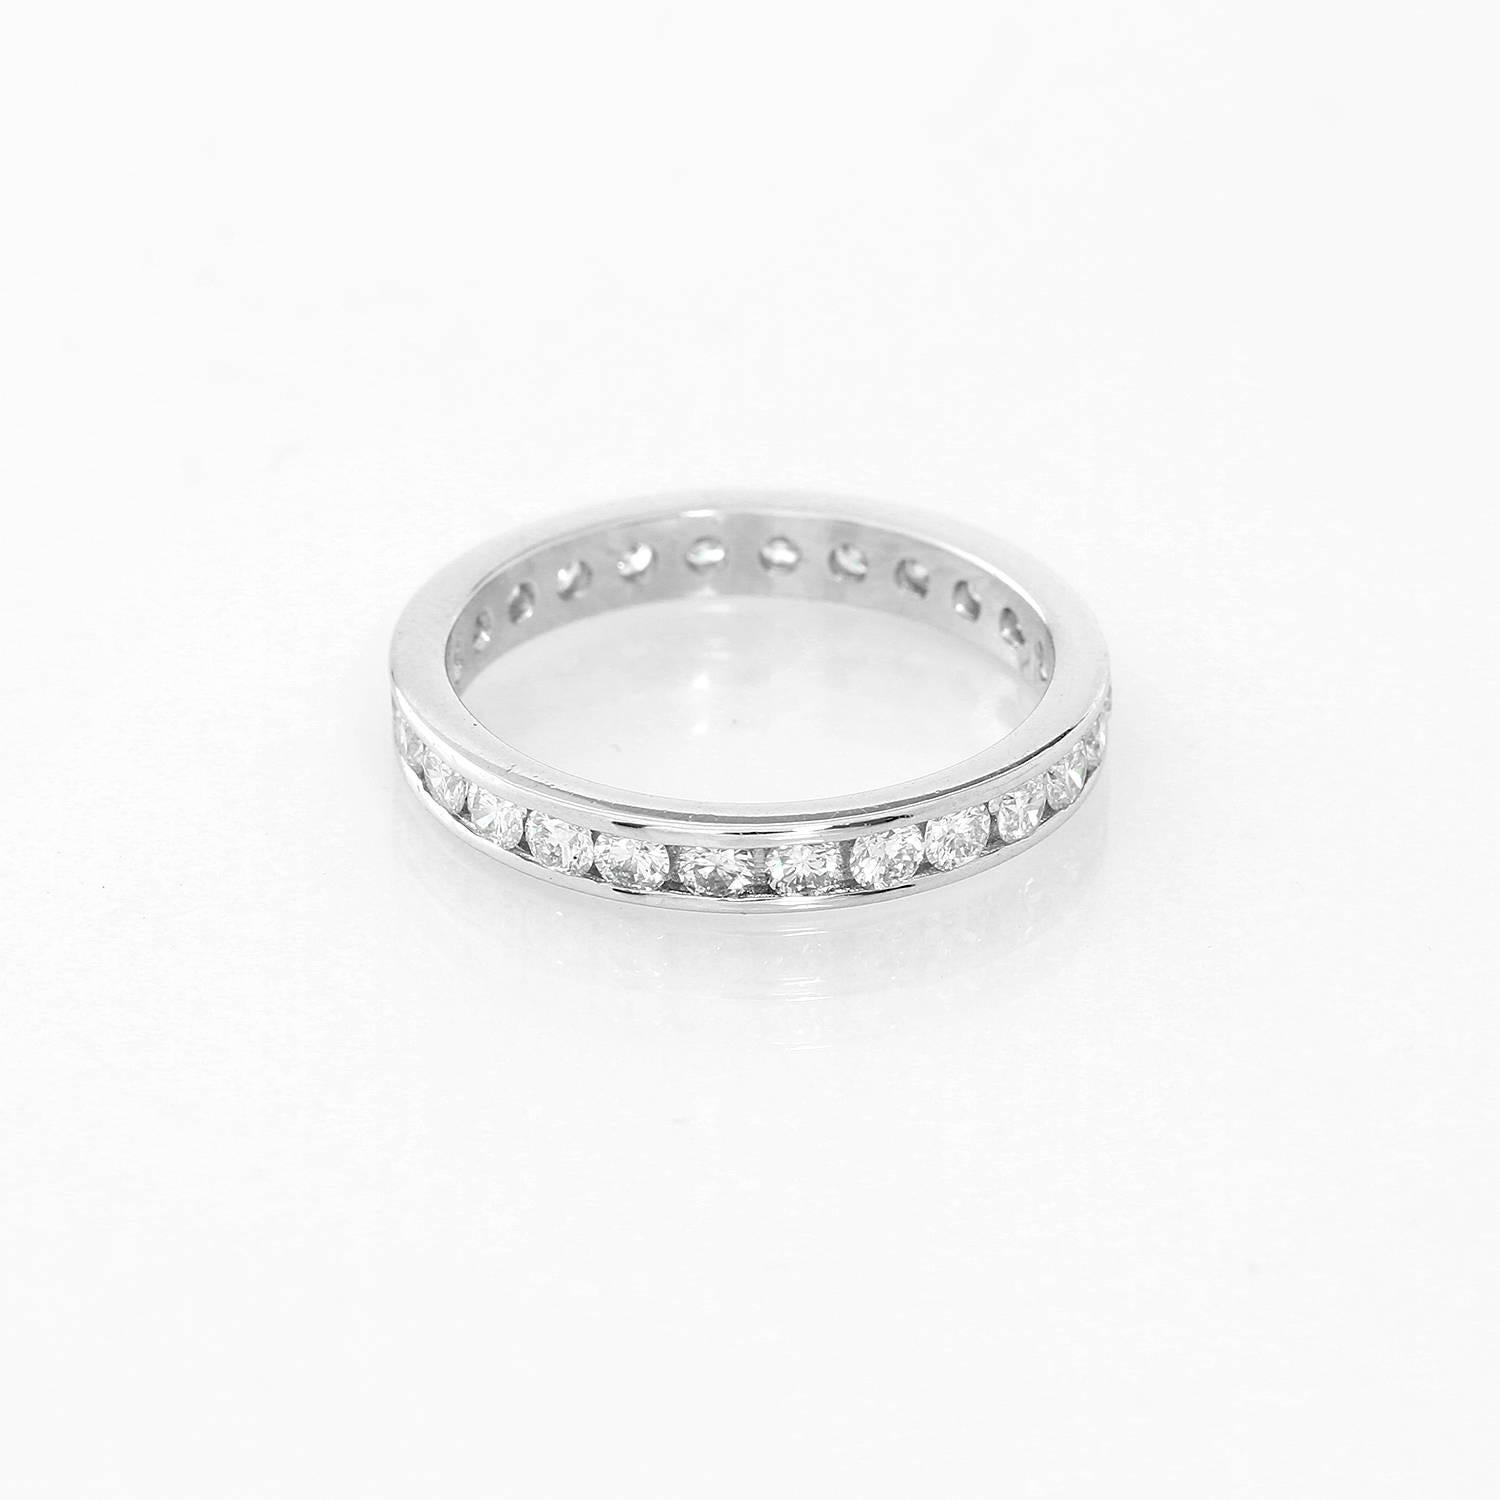 Diamond Platinum Band Size 6 1/4 - . Round Brilliant Cut  diamond band set in Platinum approx. .78 cts. -  F-G Color. VS clarity. Total weight 3.3 grams.